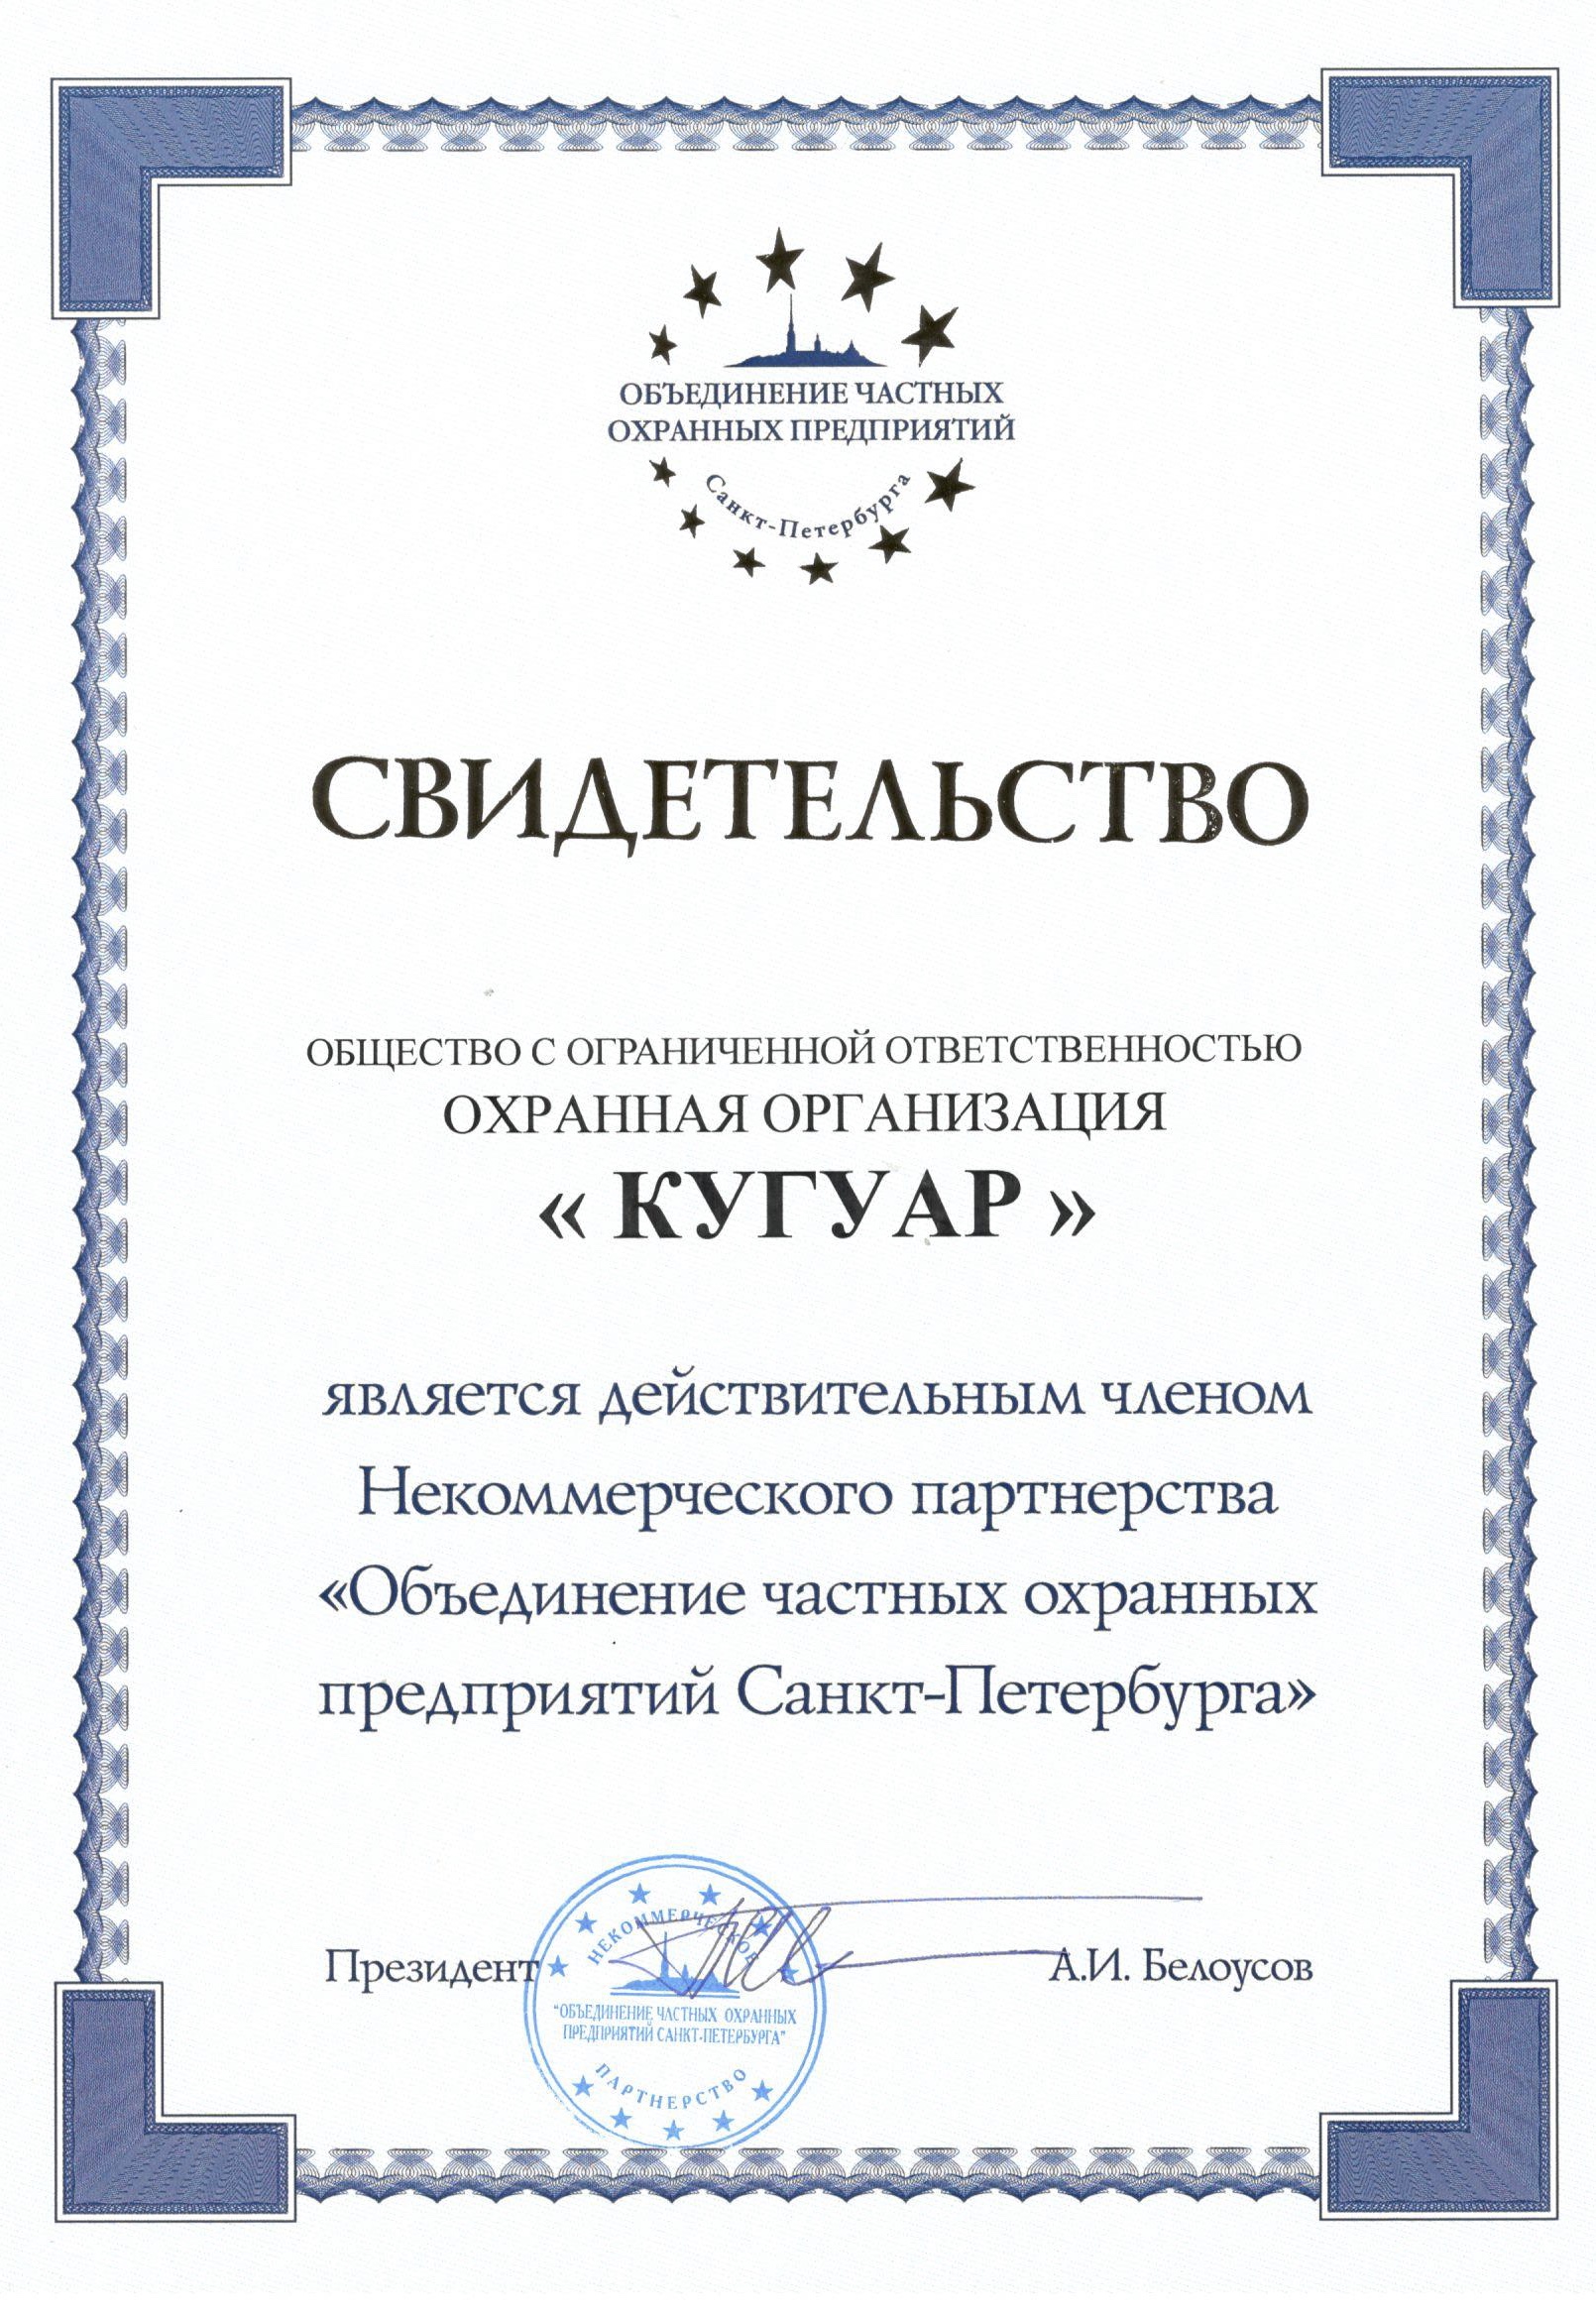 We started the new 2020 year with the entry into the Non-Profit Partnership “Association of Private Security Enterprises of St. Petersburg”